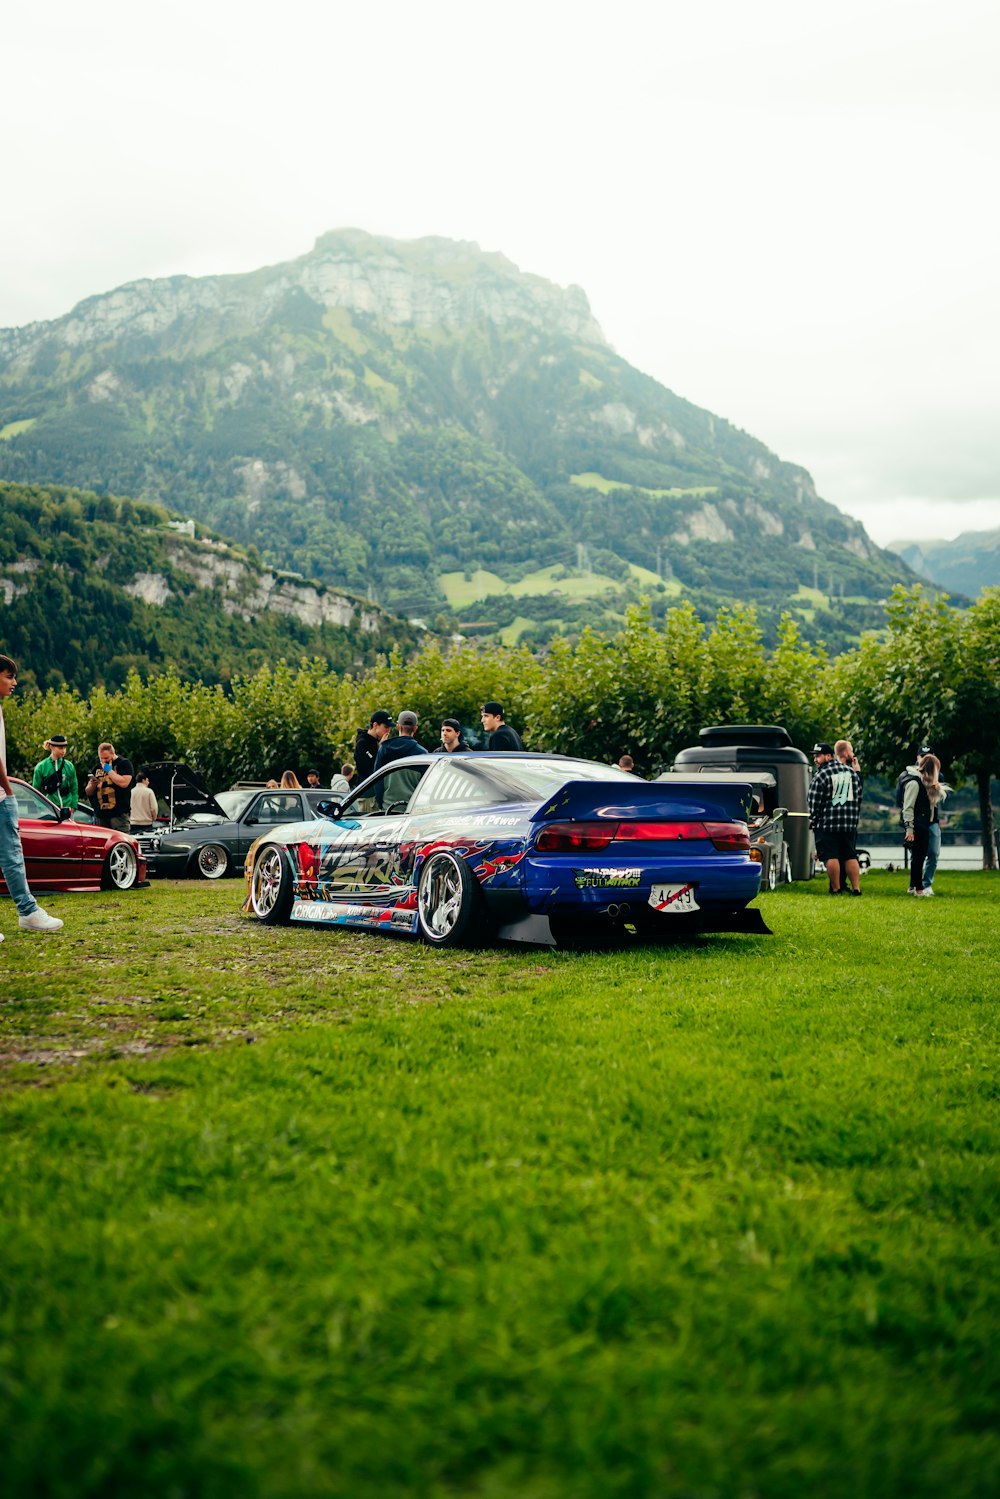 a group of cars parked in a field next to a mountain